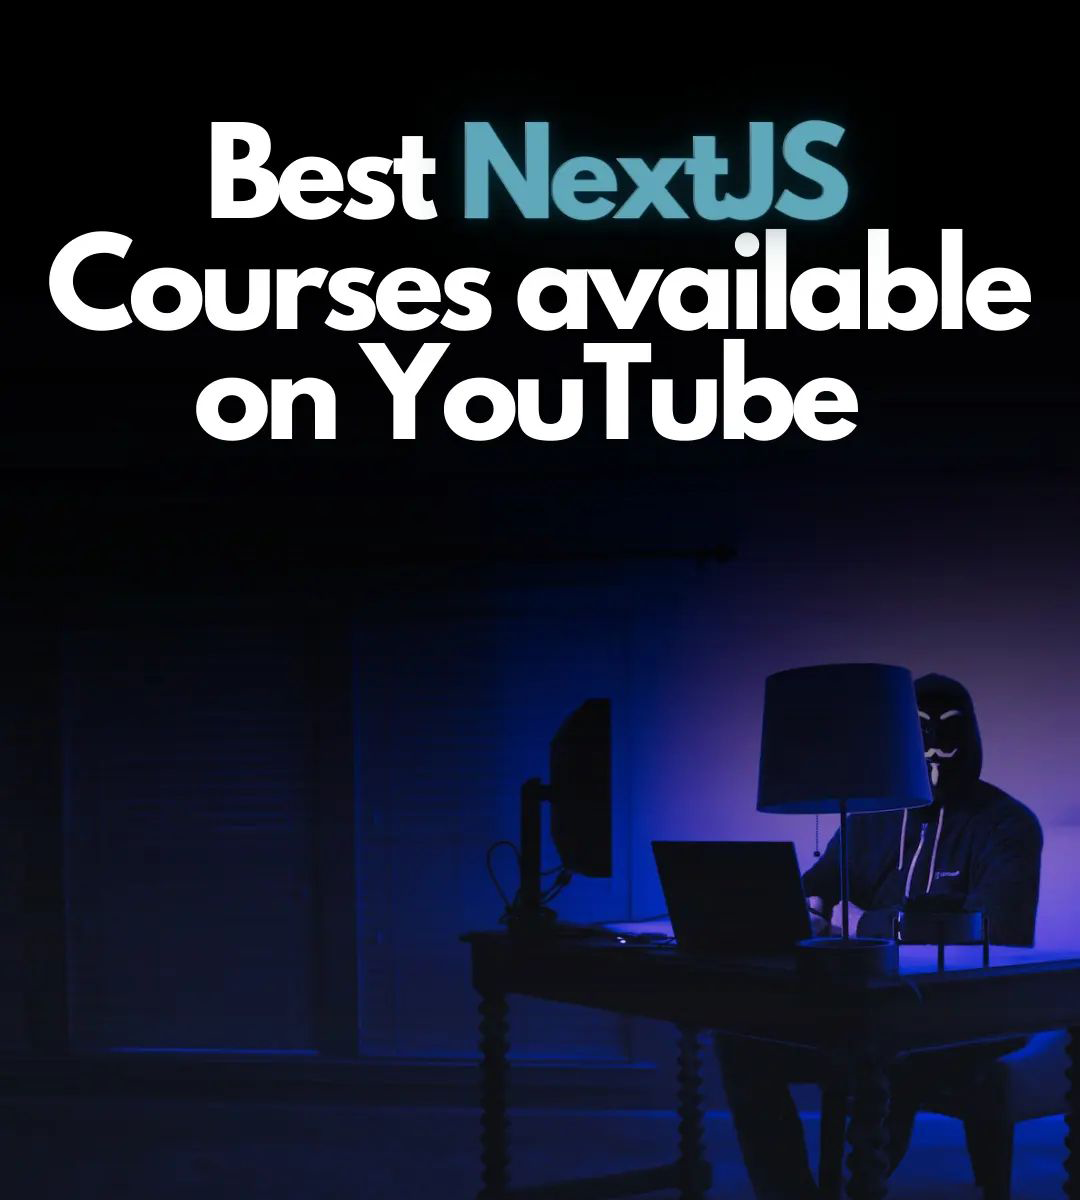 Best-NextJS-Courses-On-YouTube.png